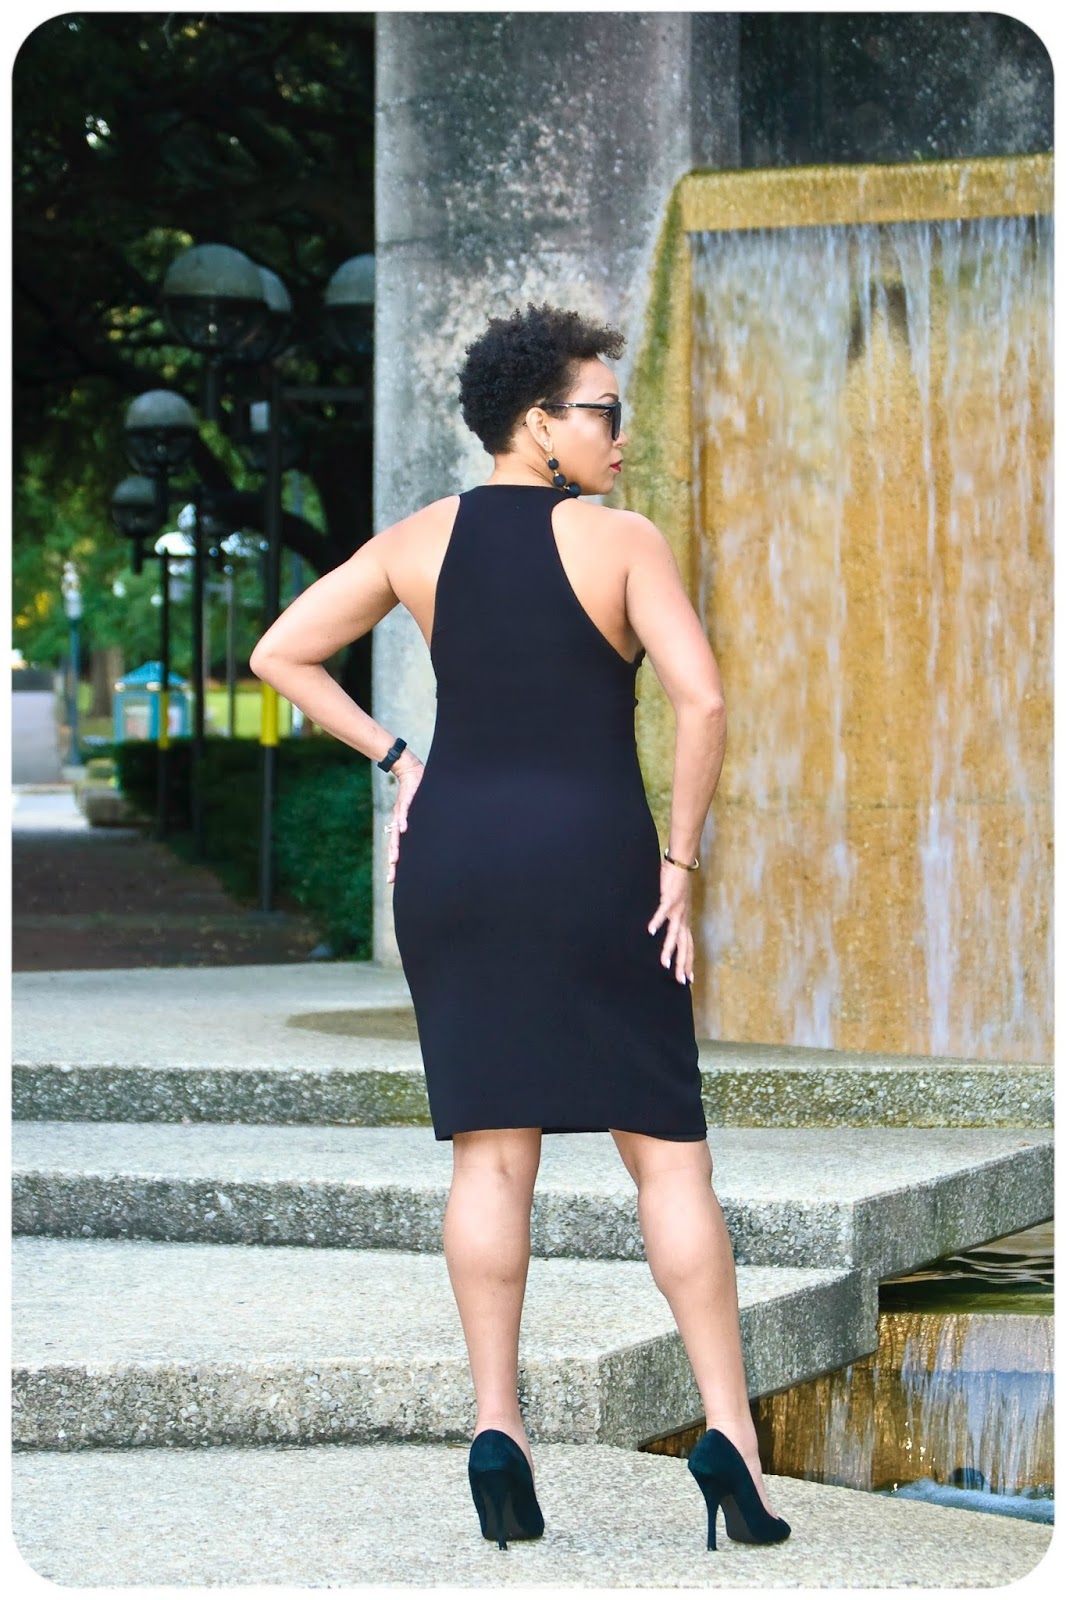 Vogue 2606 | The PERFECT Little Black Dress - Erica Bunker DIY Style!